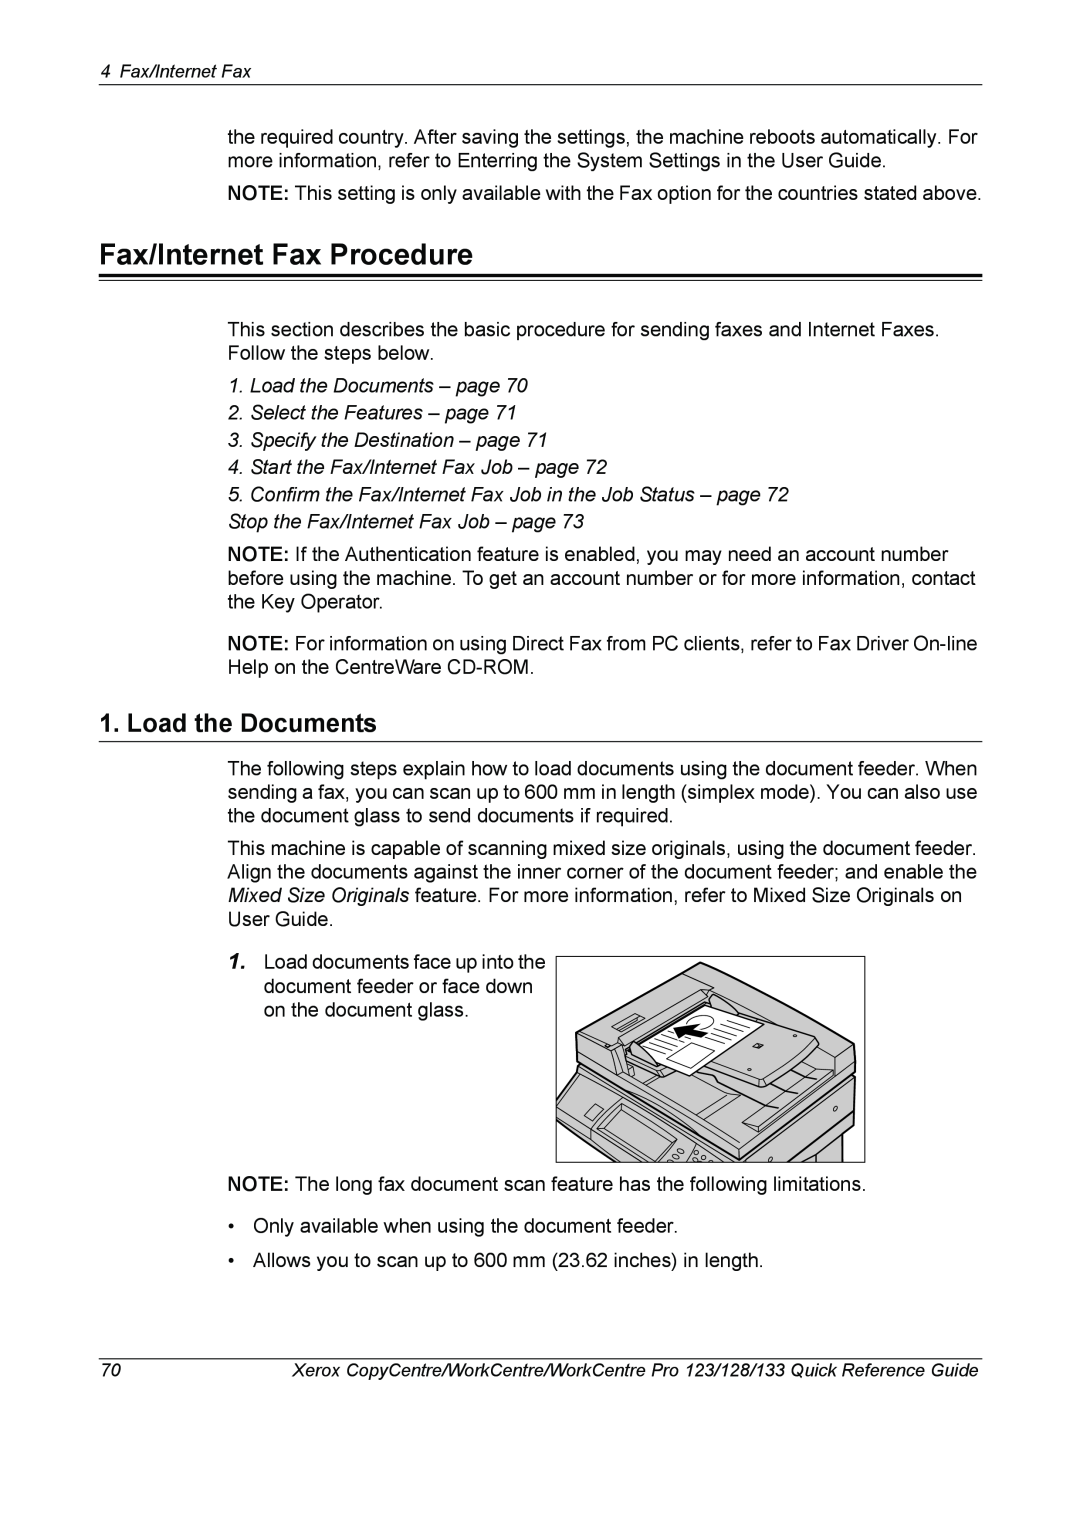 Xerox 604P18037 manual Fax/Internet Fax Procedure, Specify the Destination - page, Start the Fax/Internet Fax Job - page 